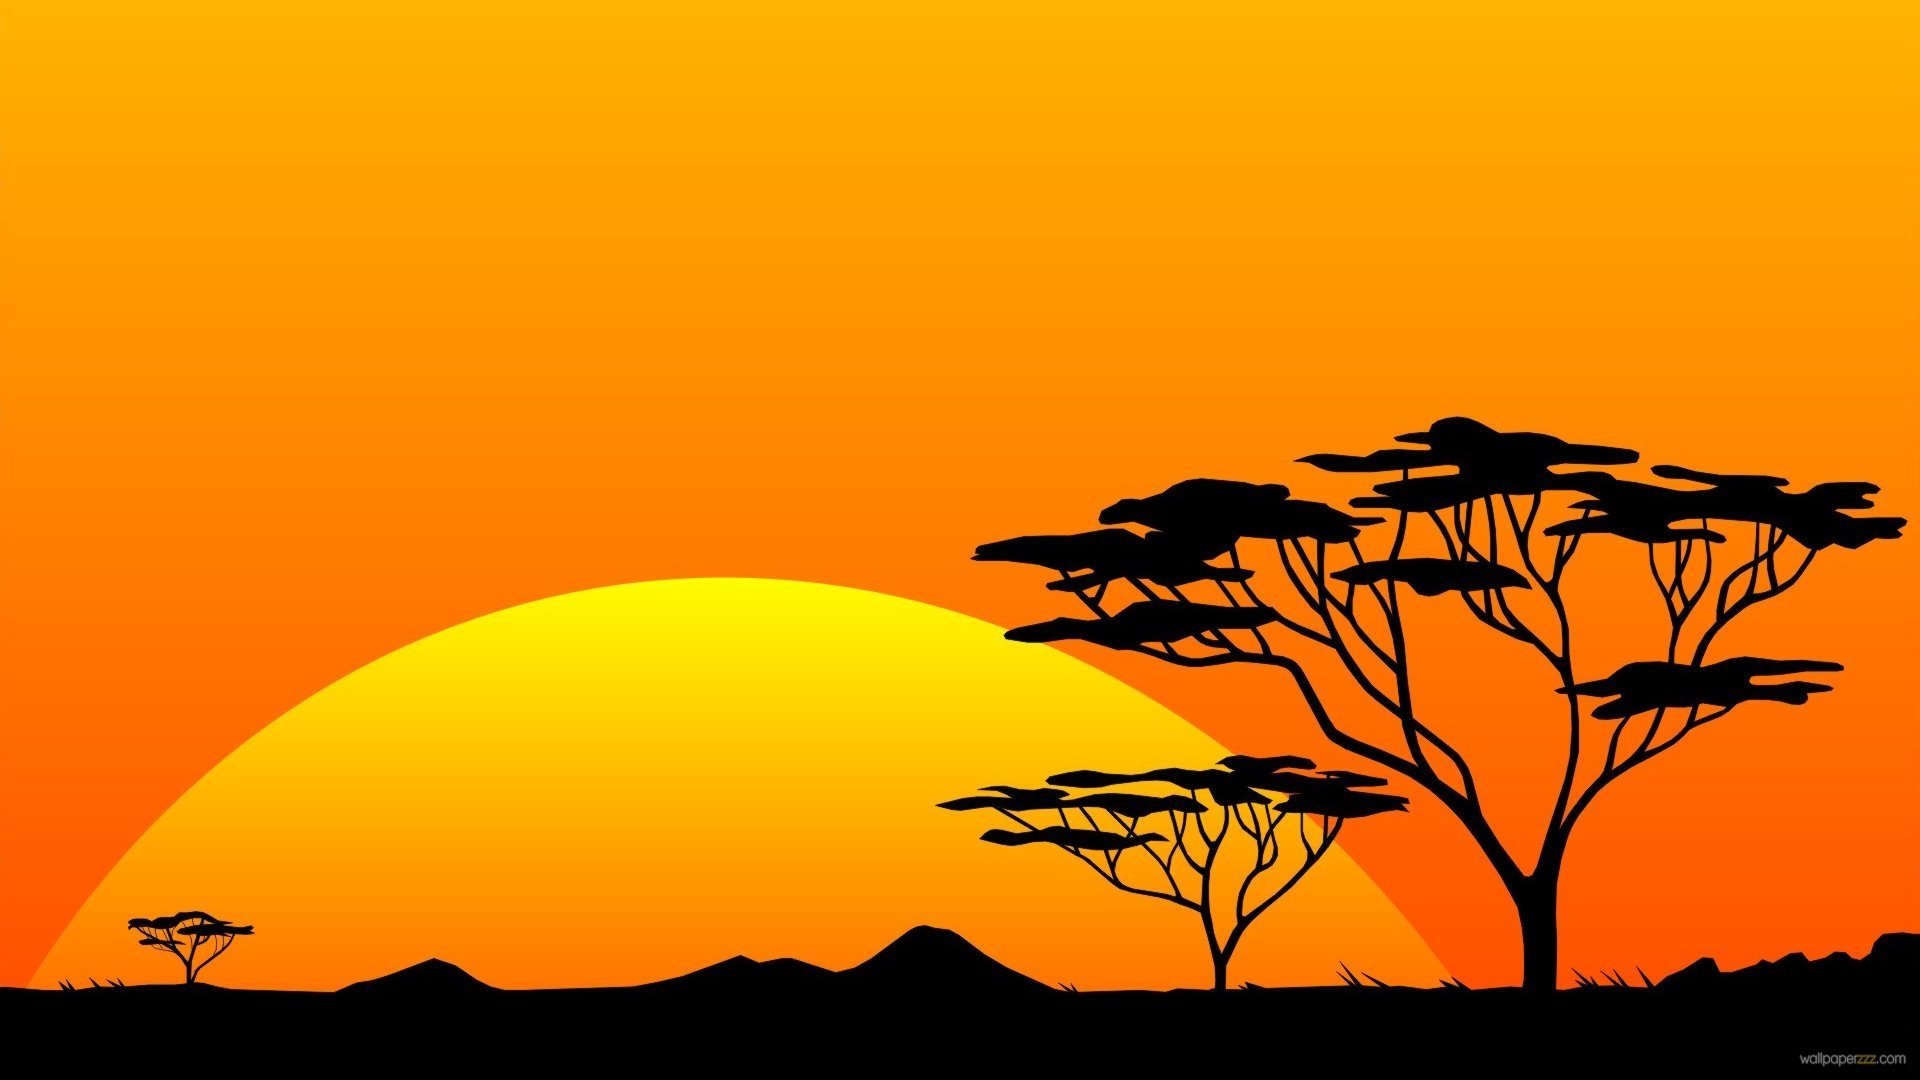 HD Africa Wallpaper For Desktop And Mobile